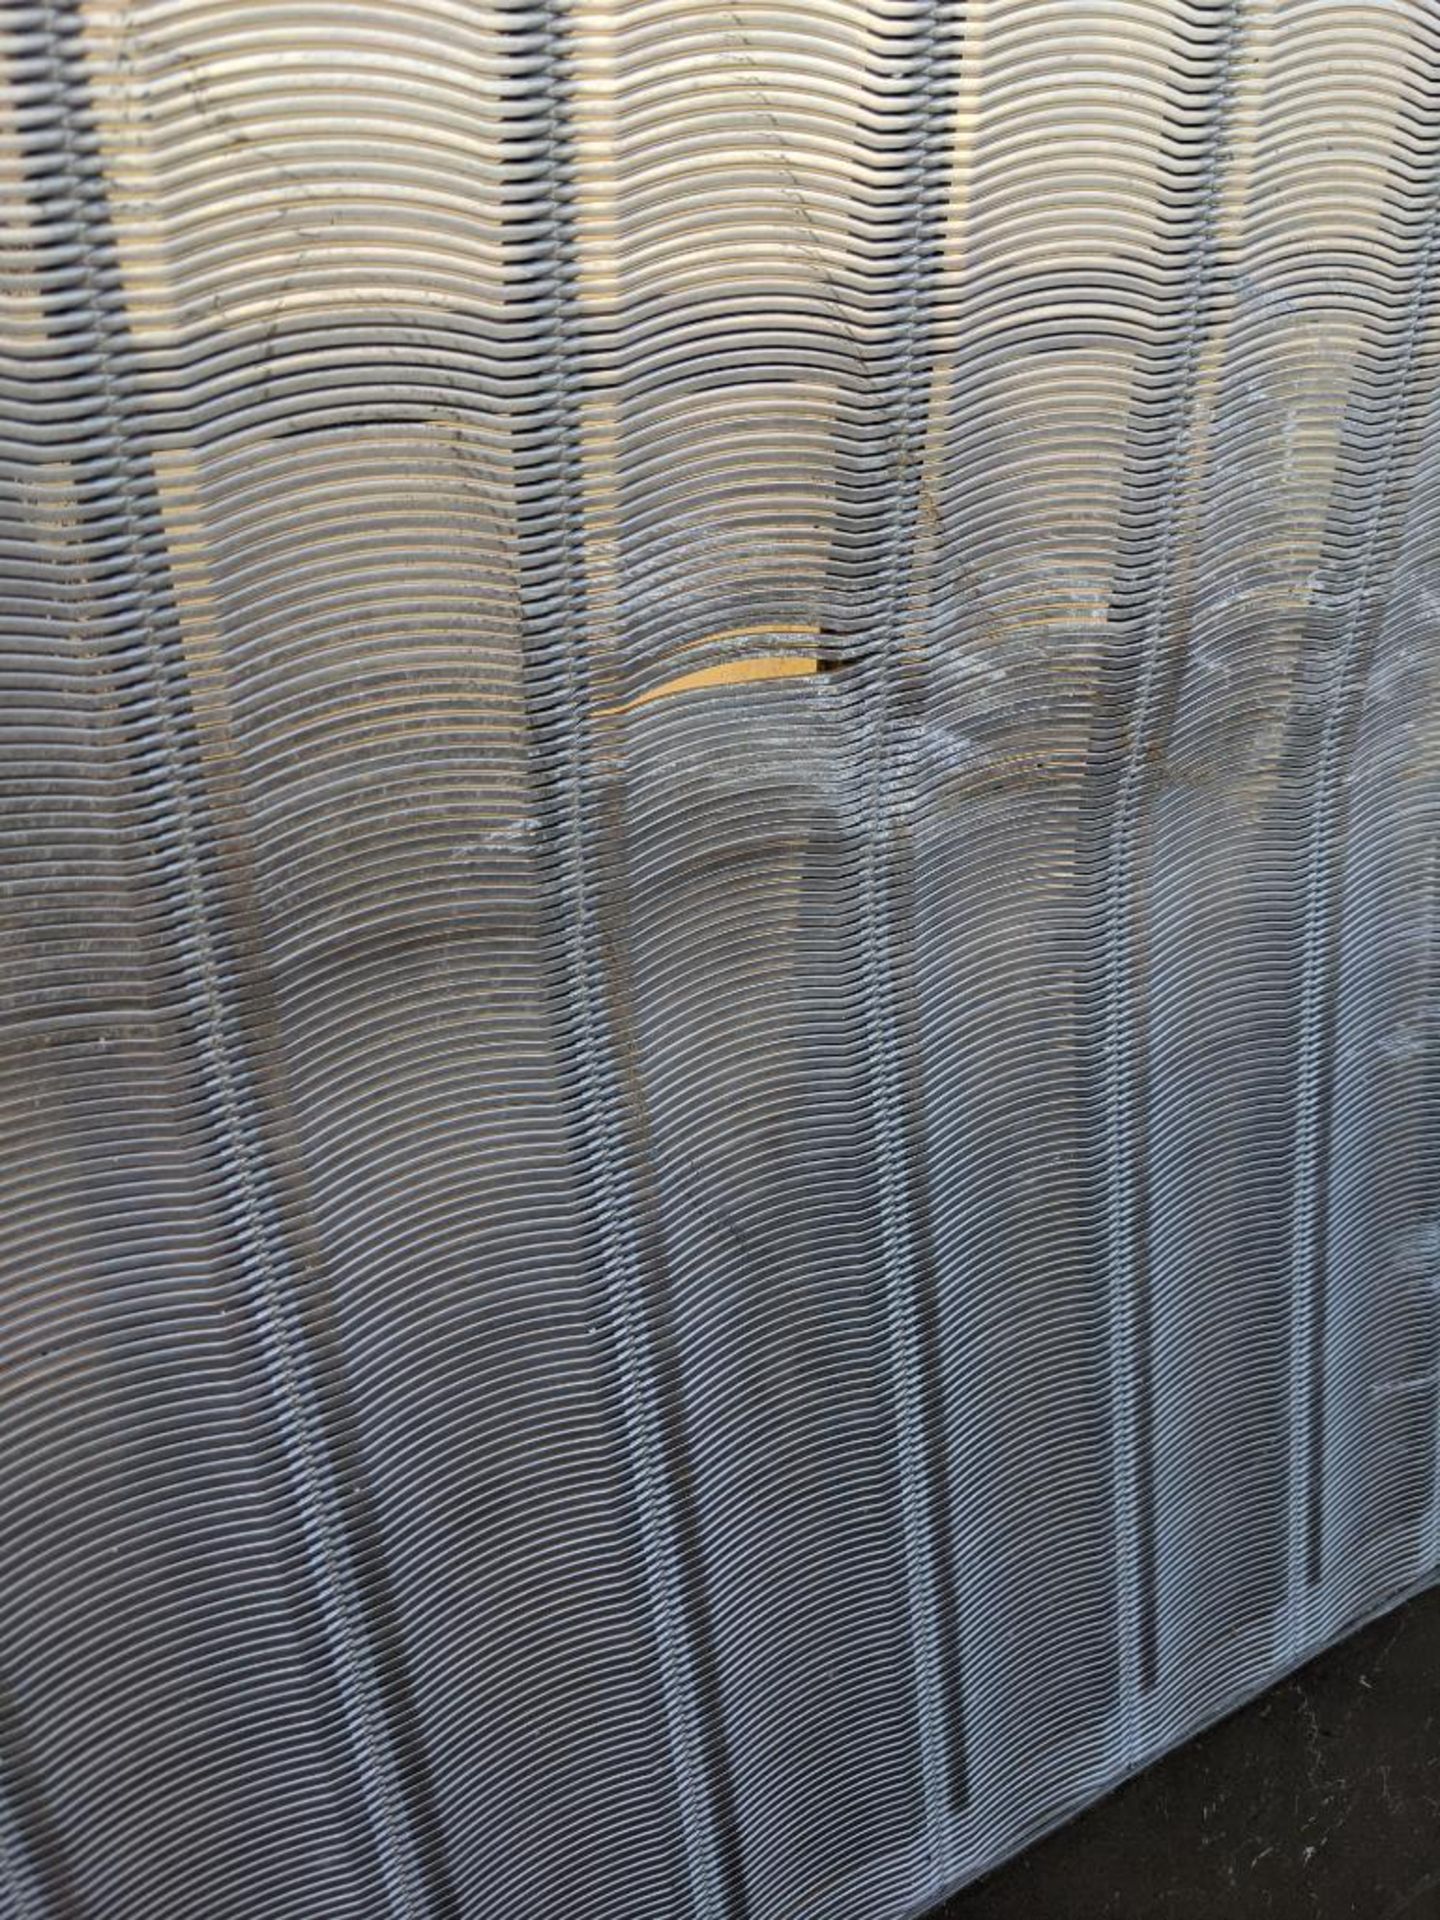 wedge wire parabolic screen stainless steel - Image 7 of 11